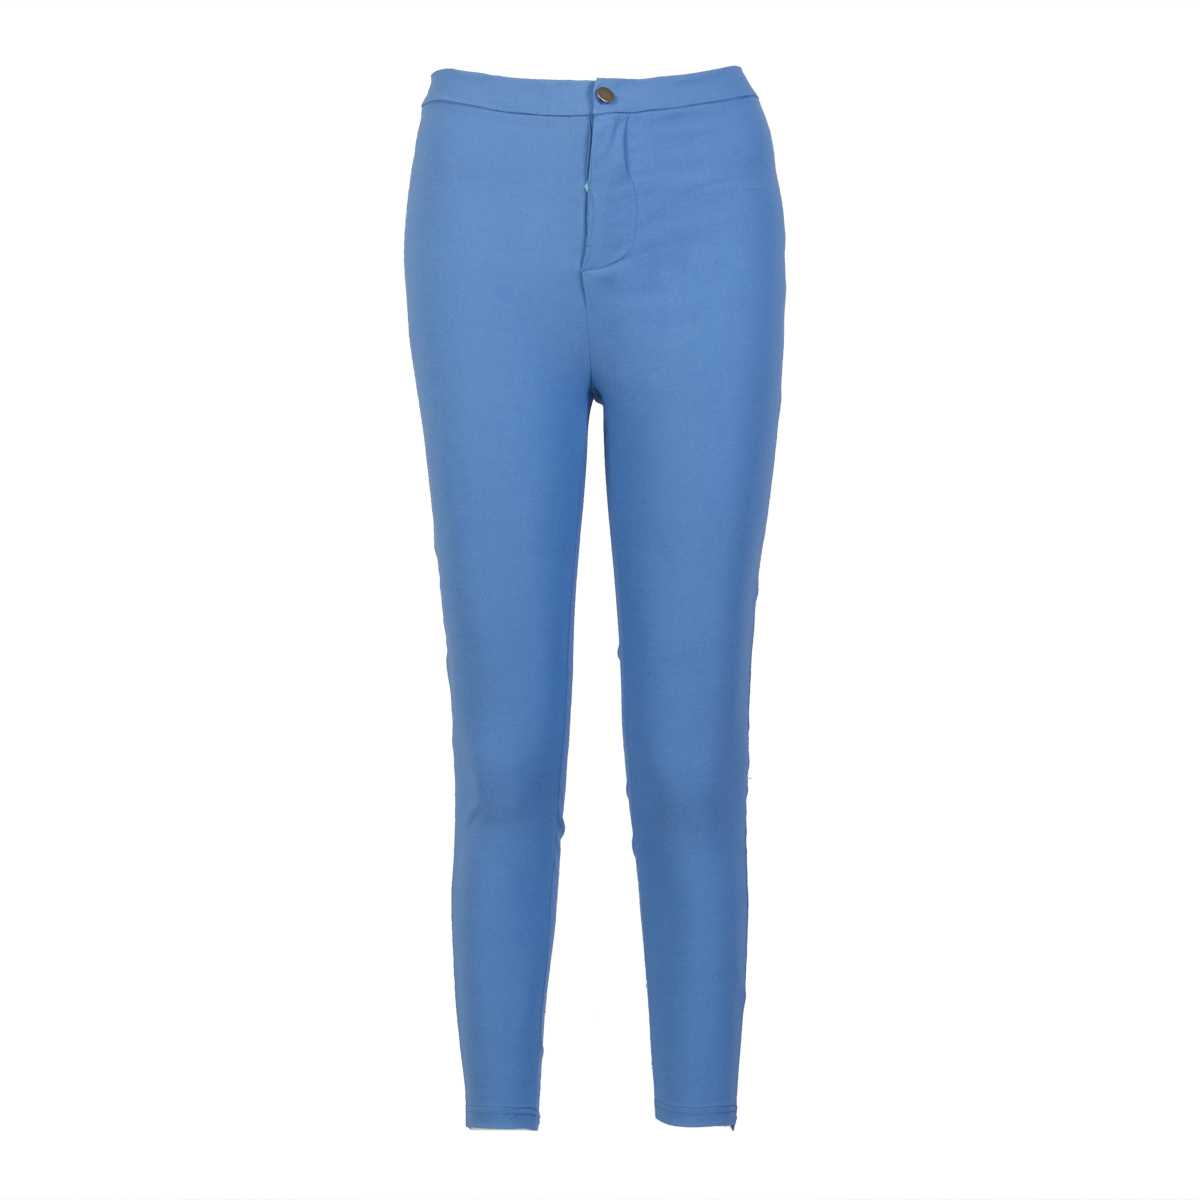 Musuos Women Denim Pencil Stretch Casual Skinny Jeans Pants Ladies High Waist Jeans Trousers - image 1 of 3